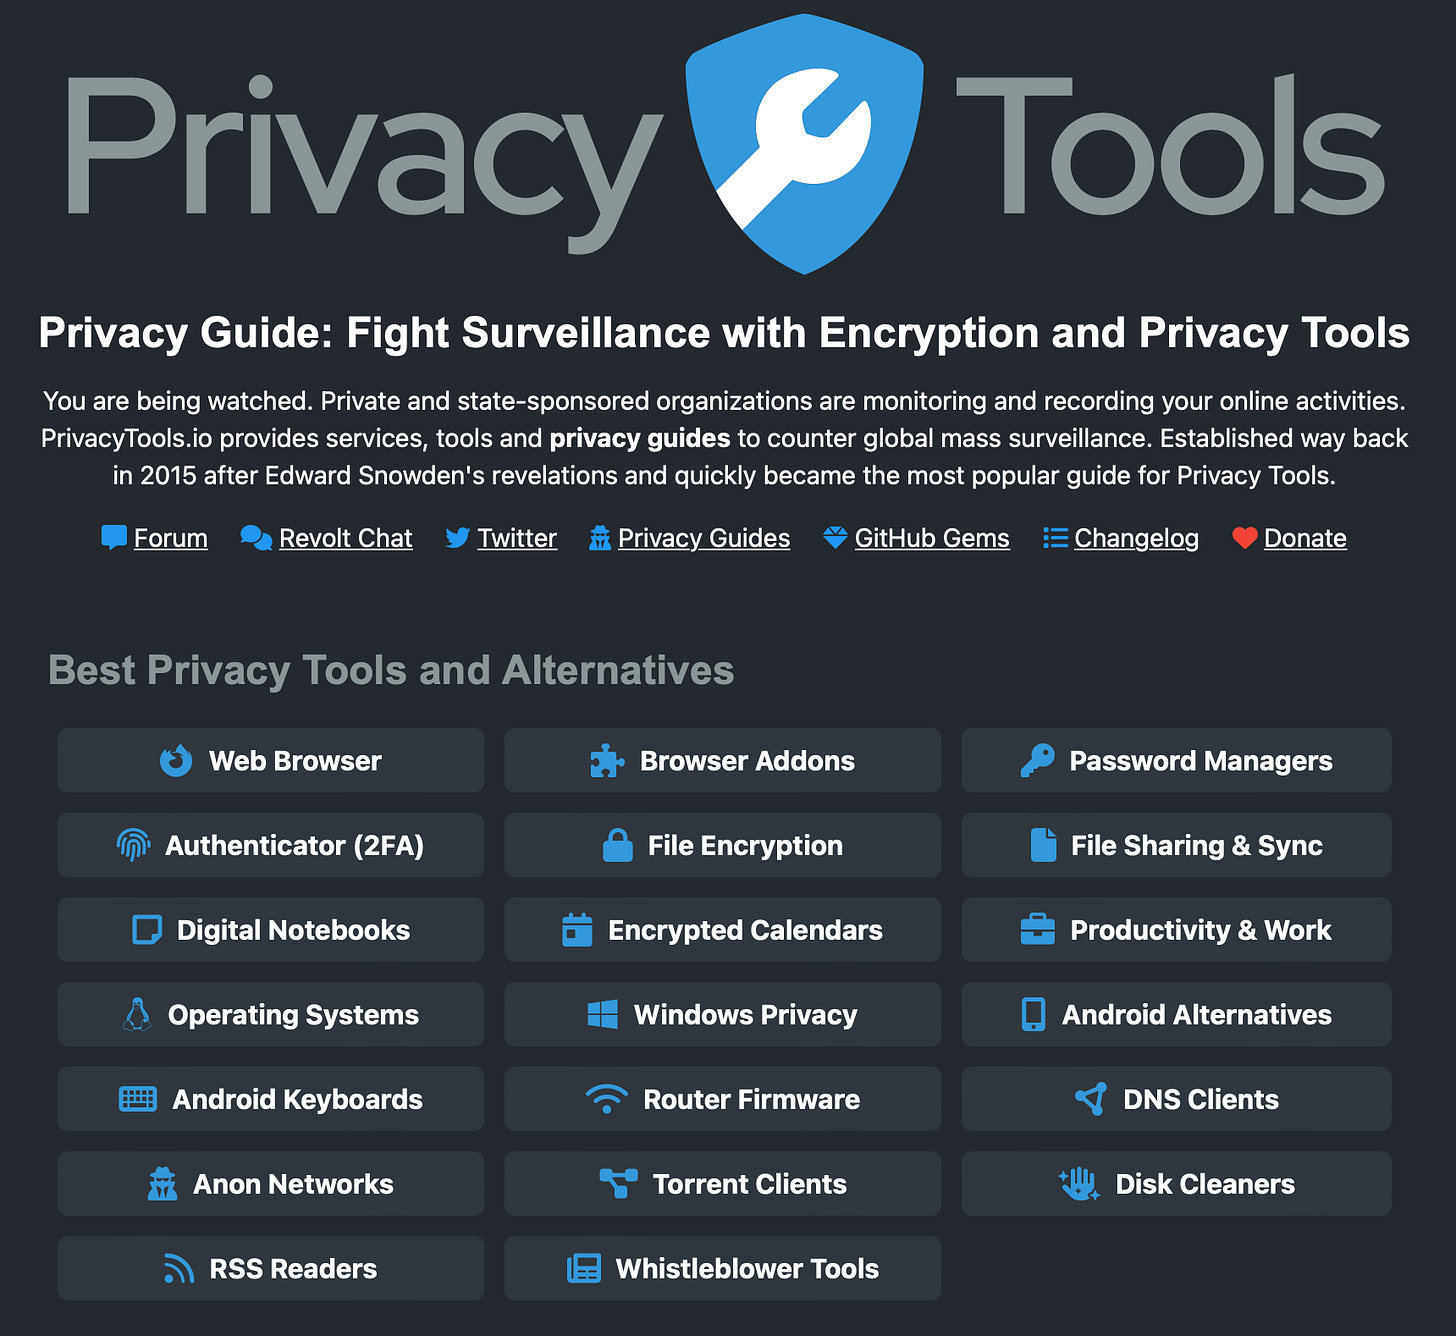 privacy tools list of categories